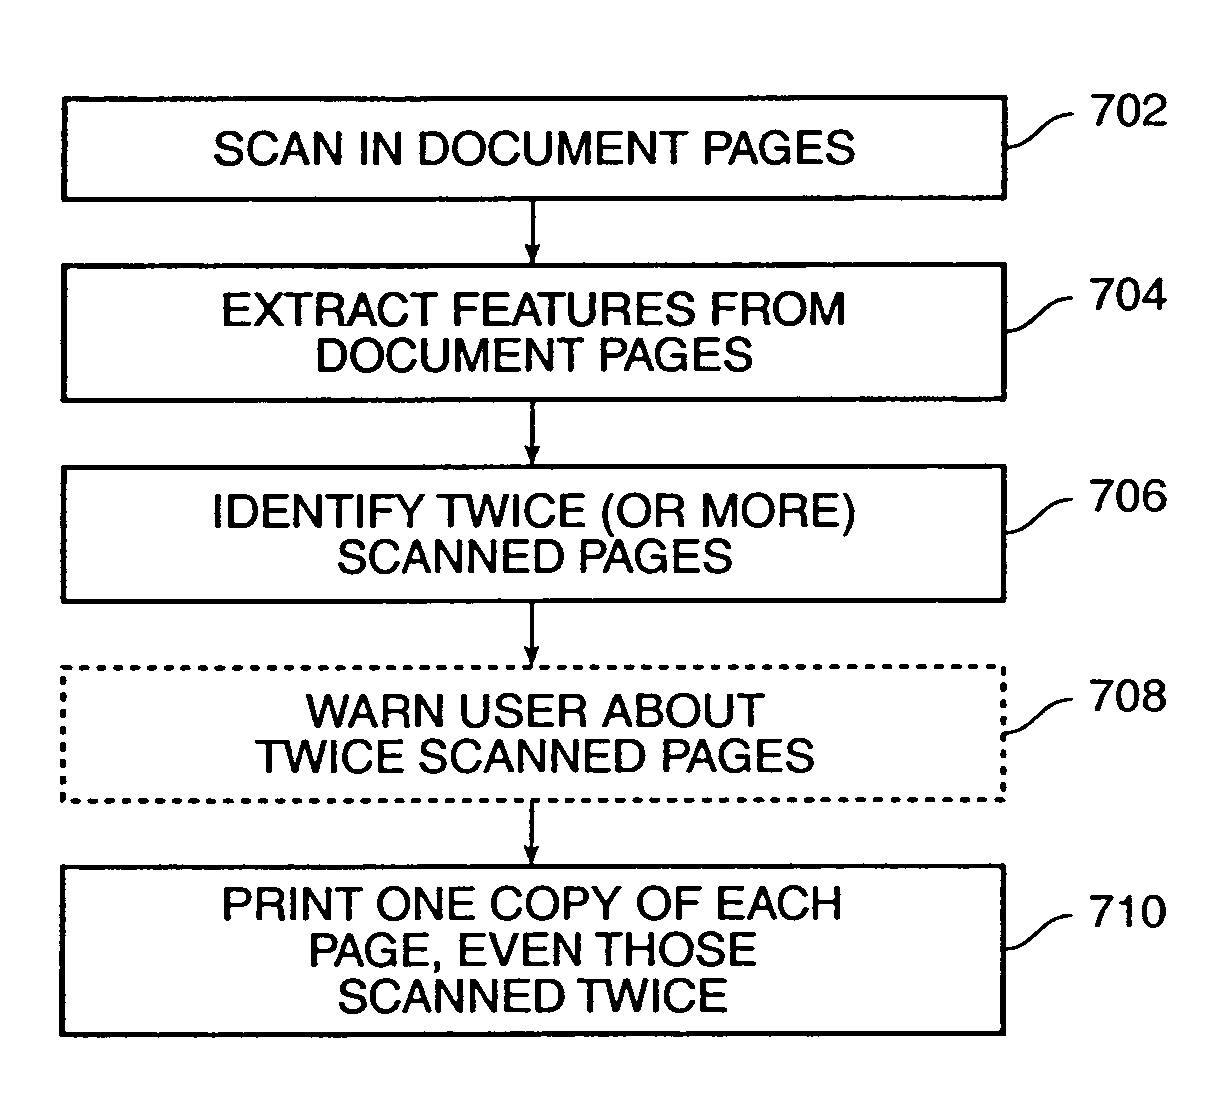 System for aligning document images when scanned in duplex mode